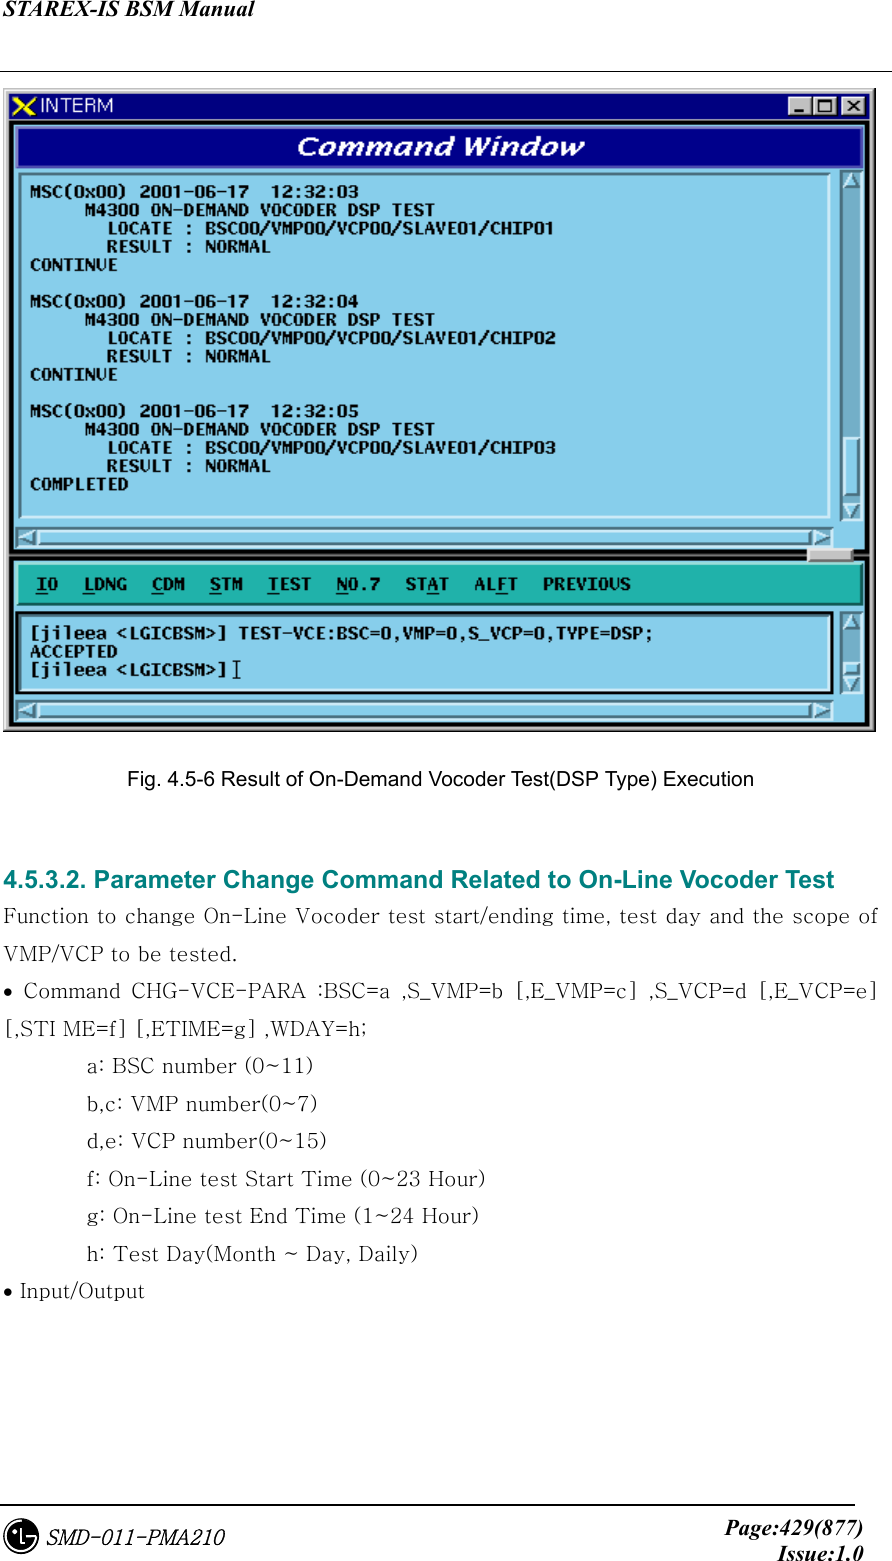 STAREX-IS BSM Manual     Page:429(877)Issue:1.0SMD-011-PMA210   Fig. 4.5-6 Result of On-Demand Vocoder Test(DSP Type) Execution  4.5.3.2. Parameter Change Command Related to On-Line Vocoder Test     Function to change On-Line Vocoder test start/ending time, test day and the scope of VMP/VCP to be tested. •  Command  CHG-VCE-PARA  :BSC=a  ,S_VMP=b  [,E_VMP=c]  ,S_VCP=d  [,E_VCP=e] [,STI ME=f] [,ETIME=g] ,WDAY=h;   a: BSC number (0~11)   b,c: VMP number(0~7)   d,e: VCP number(0~15)   f: On-Line test Start Time (0~23 Hour)   g: On-Line test End Time (1~24 Hour)   h: Test Day(Month ~ Day, Daily) • Input/Output 